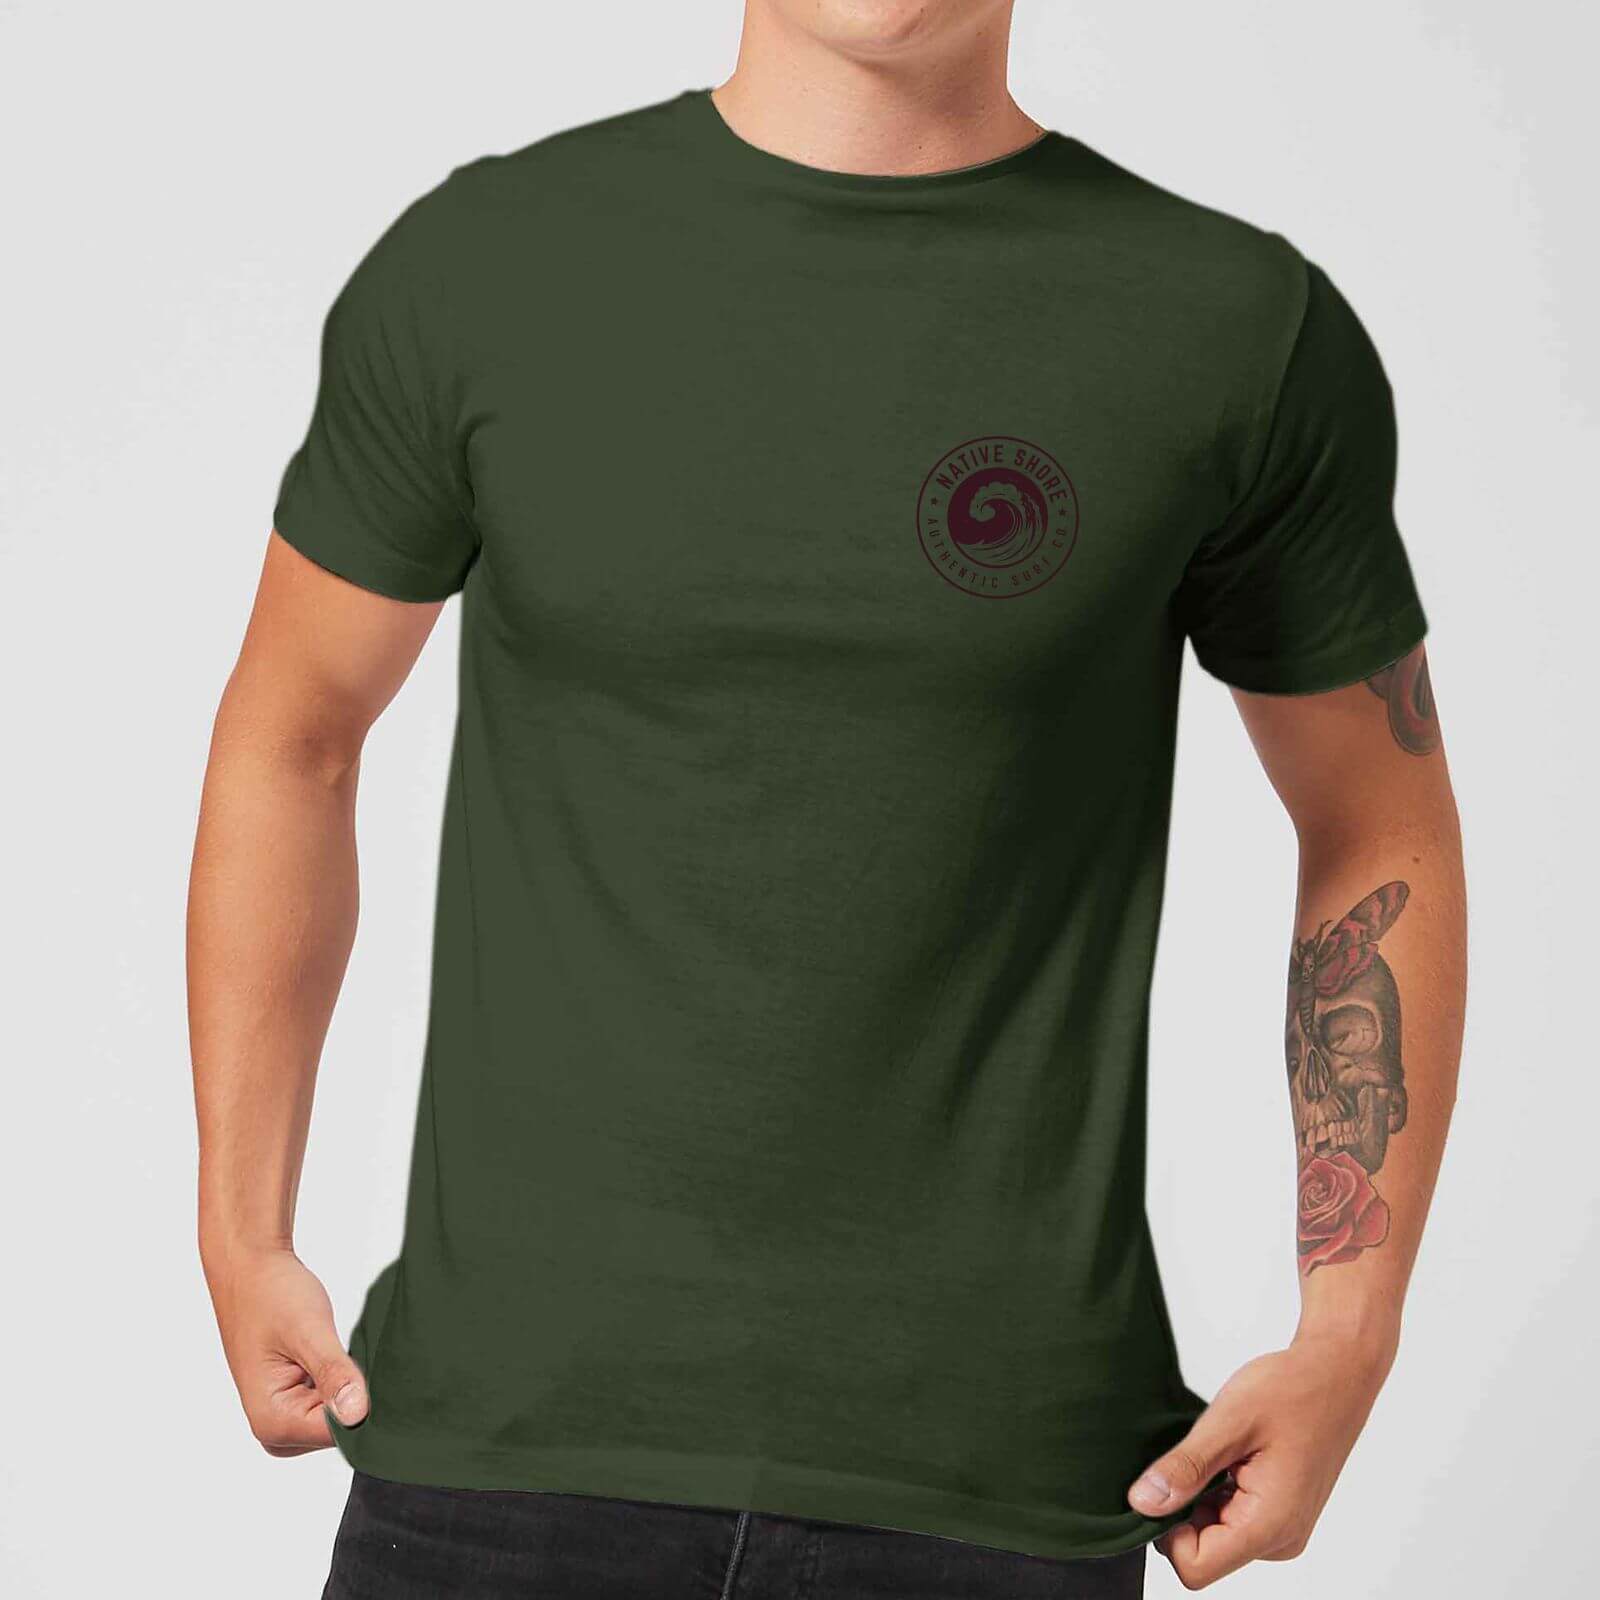 Native Shore Men's Wave T-Shirt - Forest Green - M - Forest Green